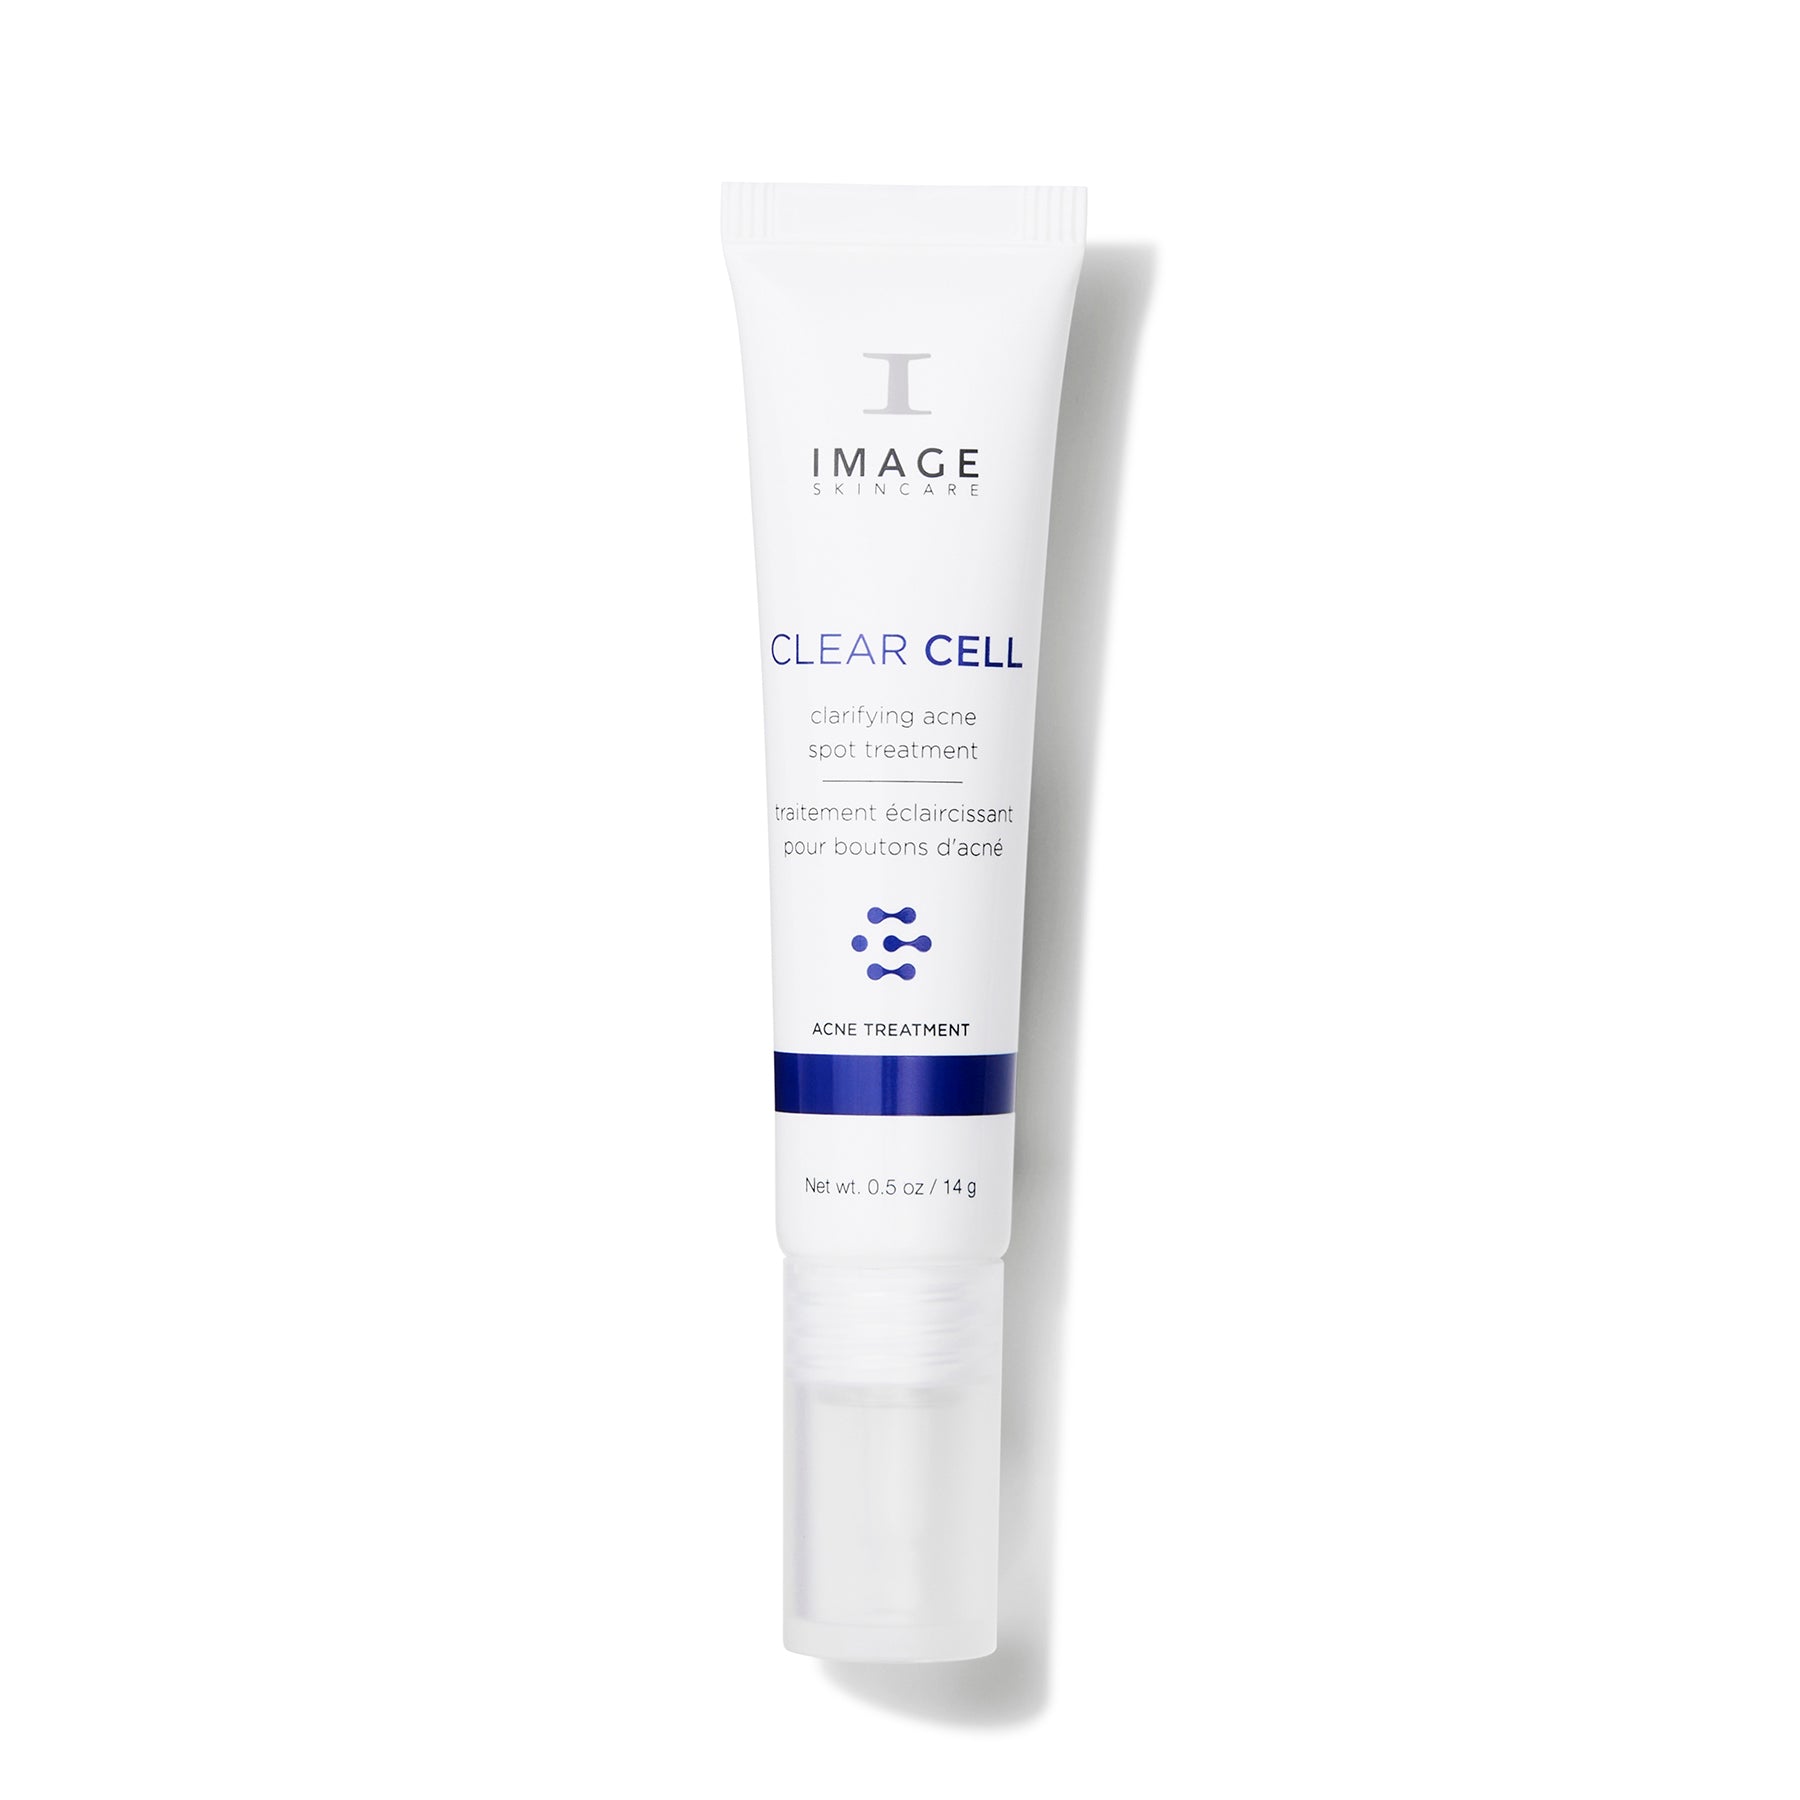 CLEAR CELL clarifying acne spot treatment tube